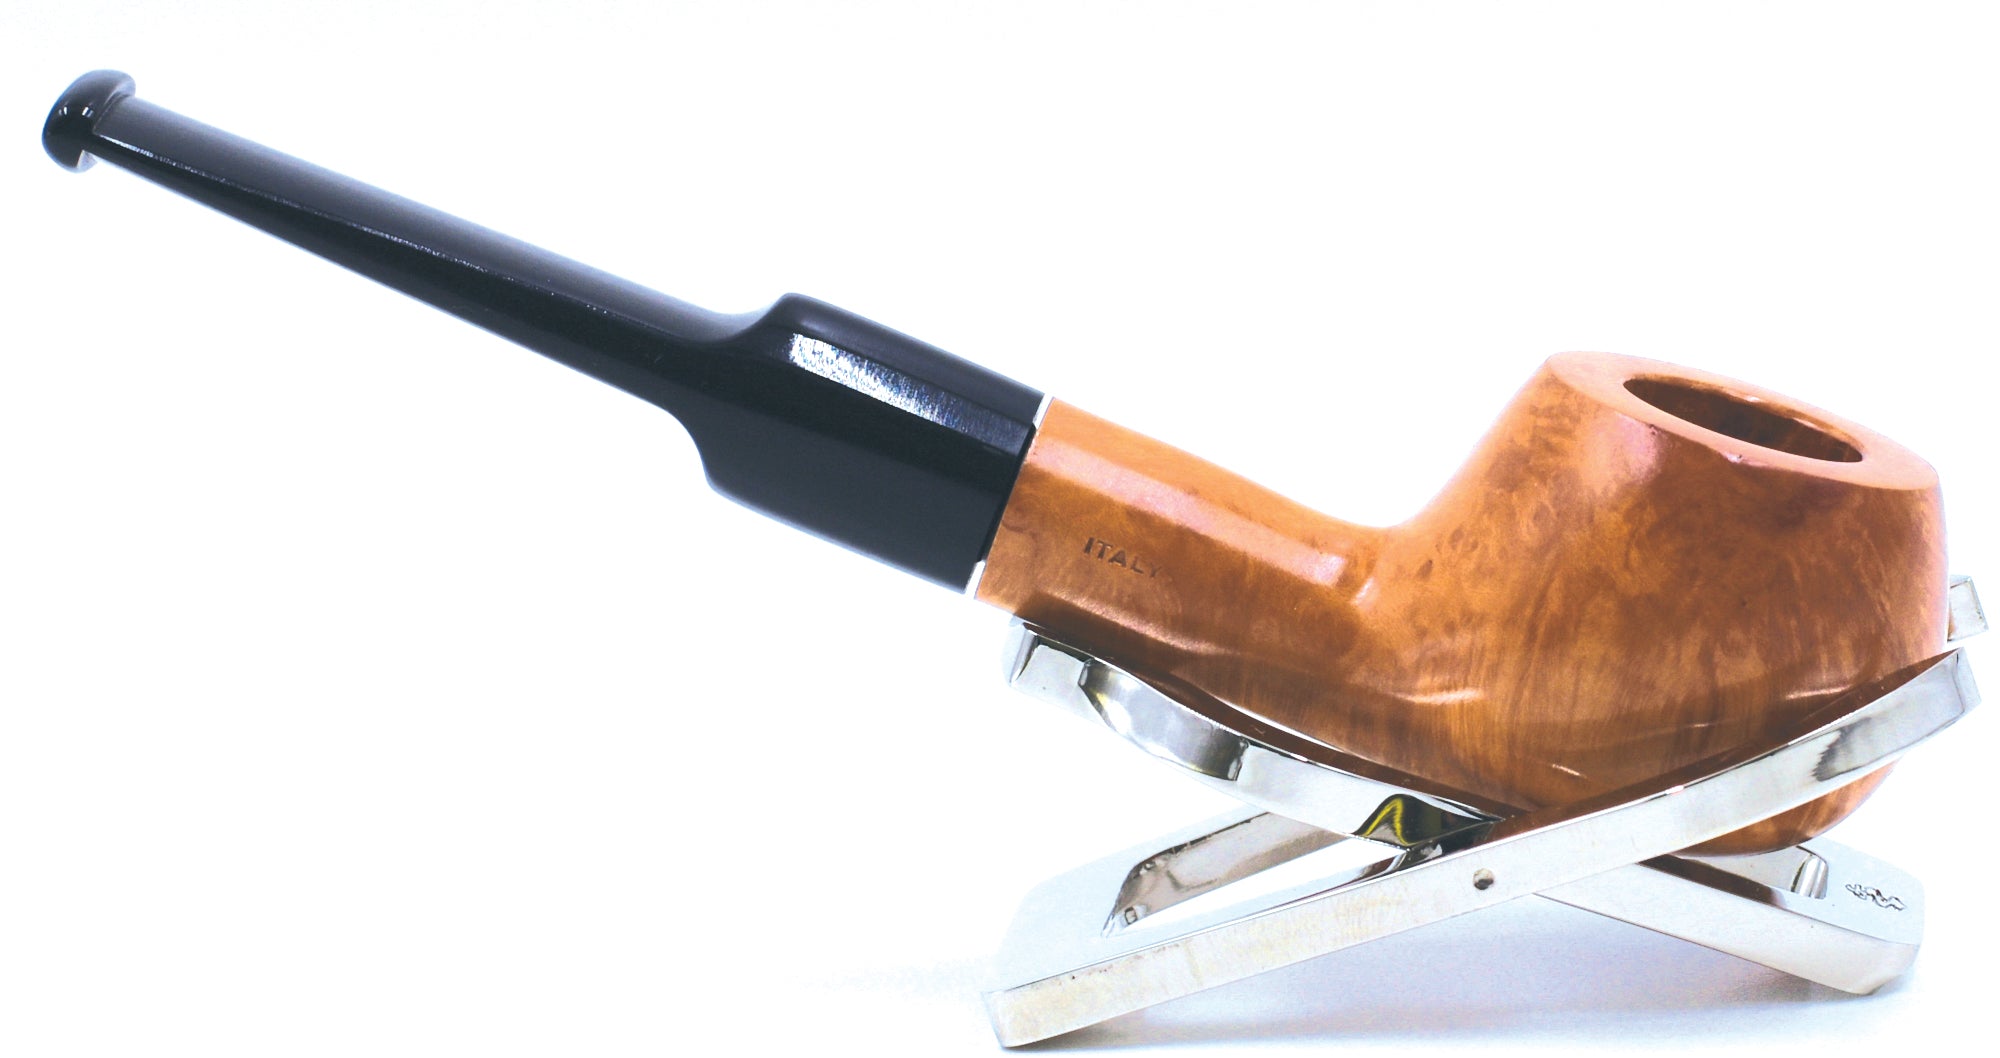 LEGENDEX® SCALADI* 9 MM Filtered Briar Smoking Pipe Made In Italy 01-08-119